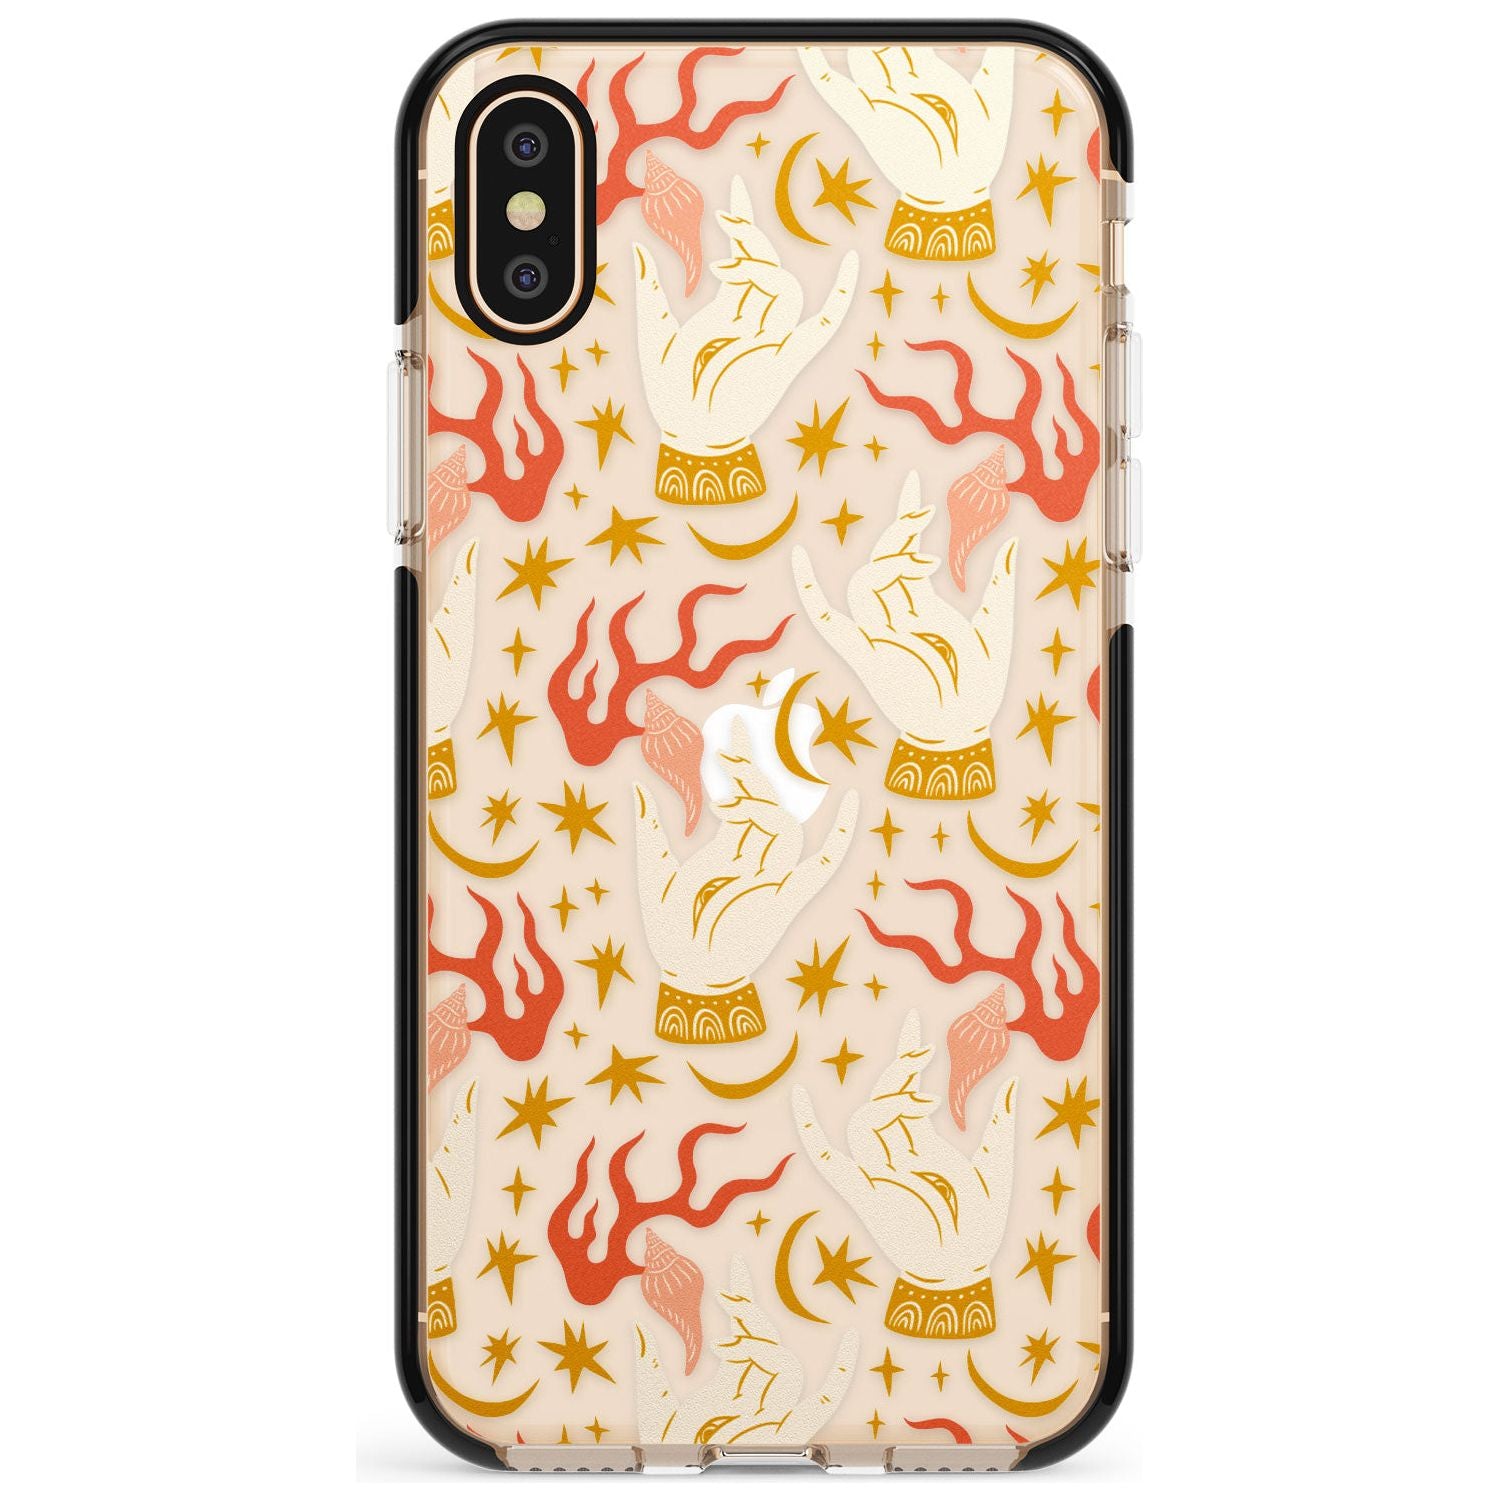 Hand Watcher Pattern Black Impact Phone Case for iPhone X XS Max XR